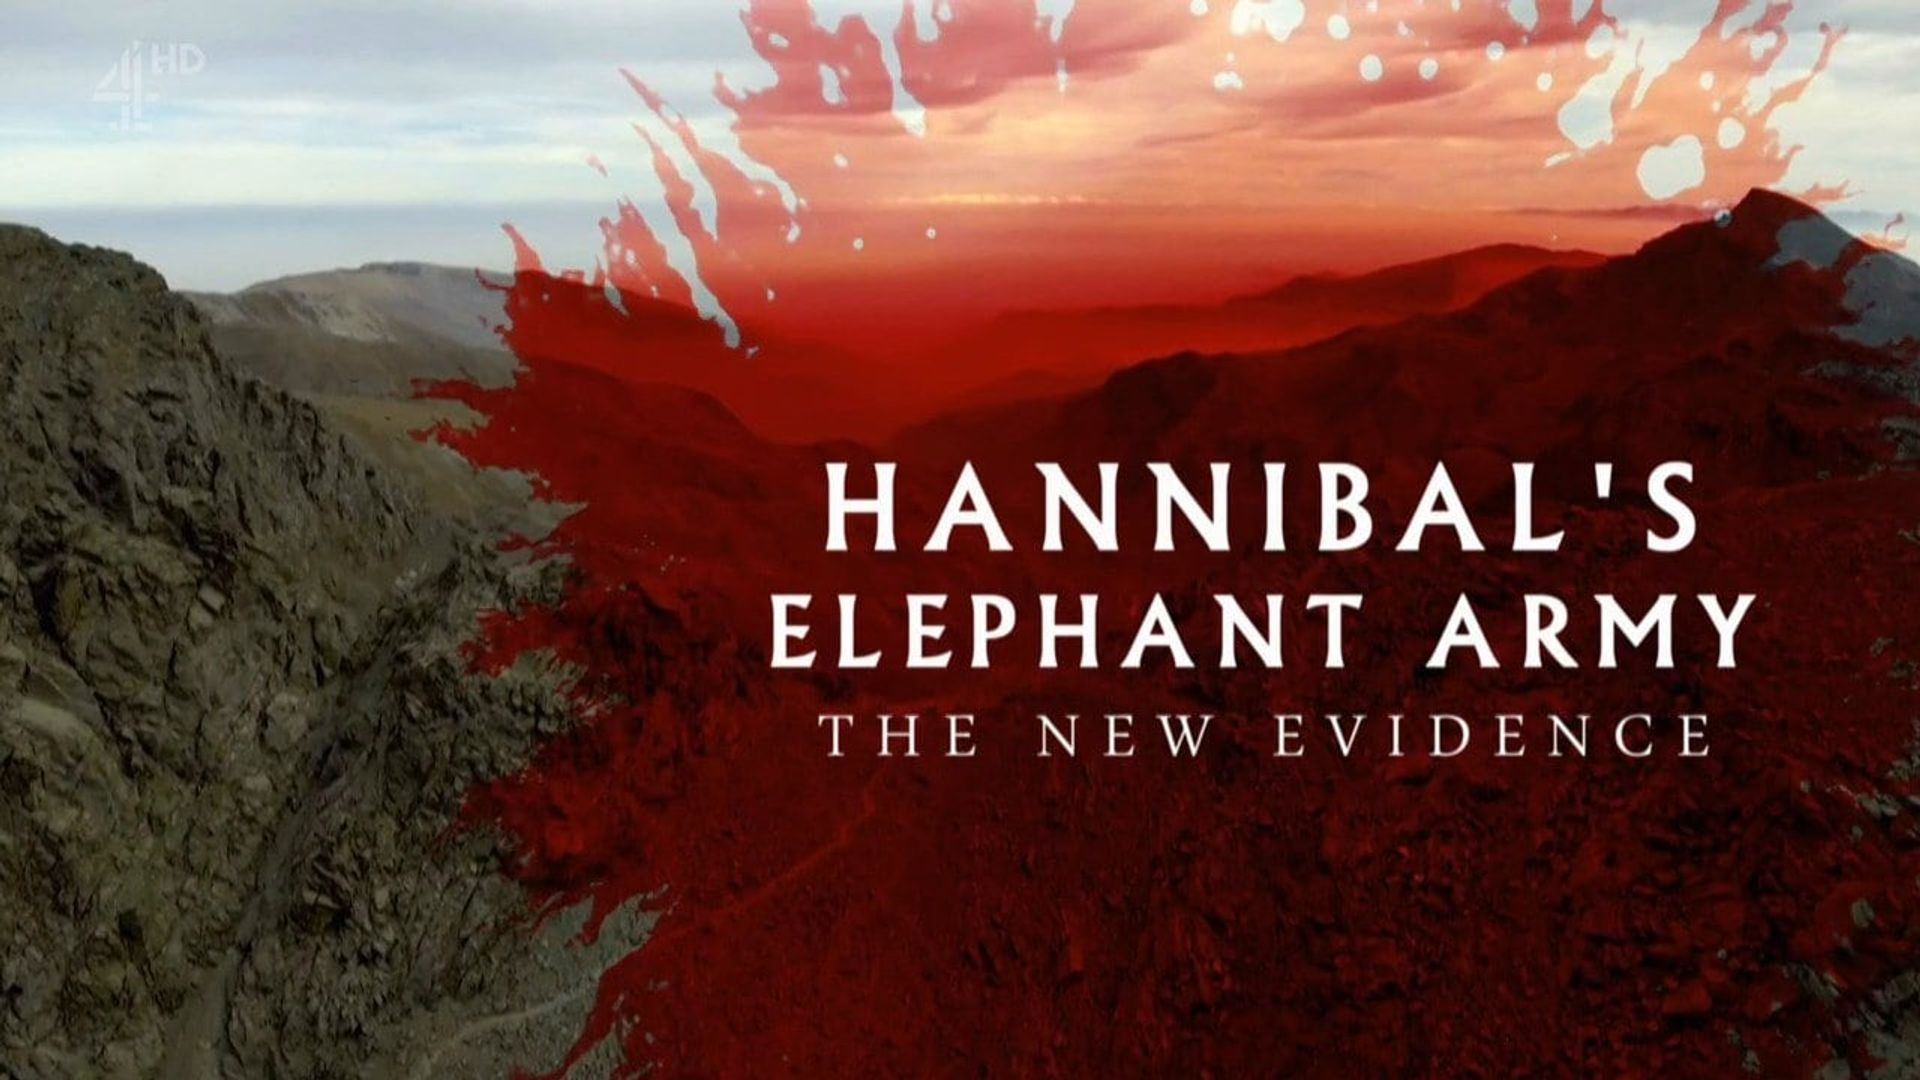 Hannibal's Elephant Army: The New Evidence background